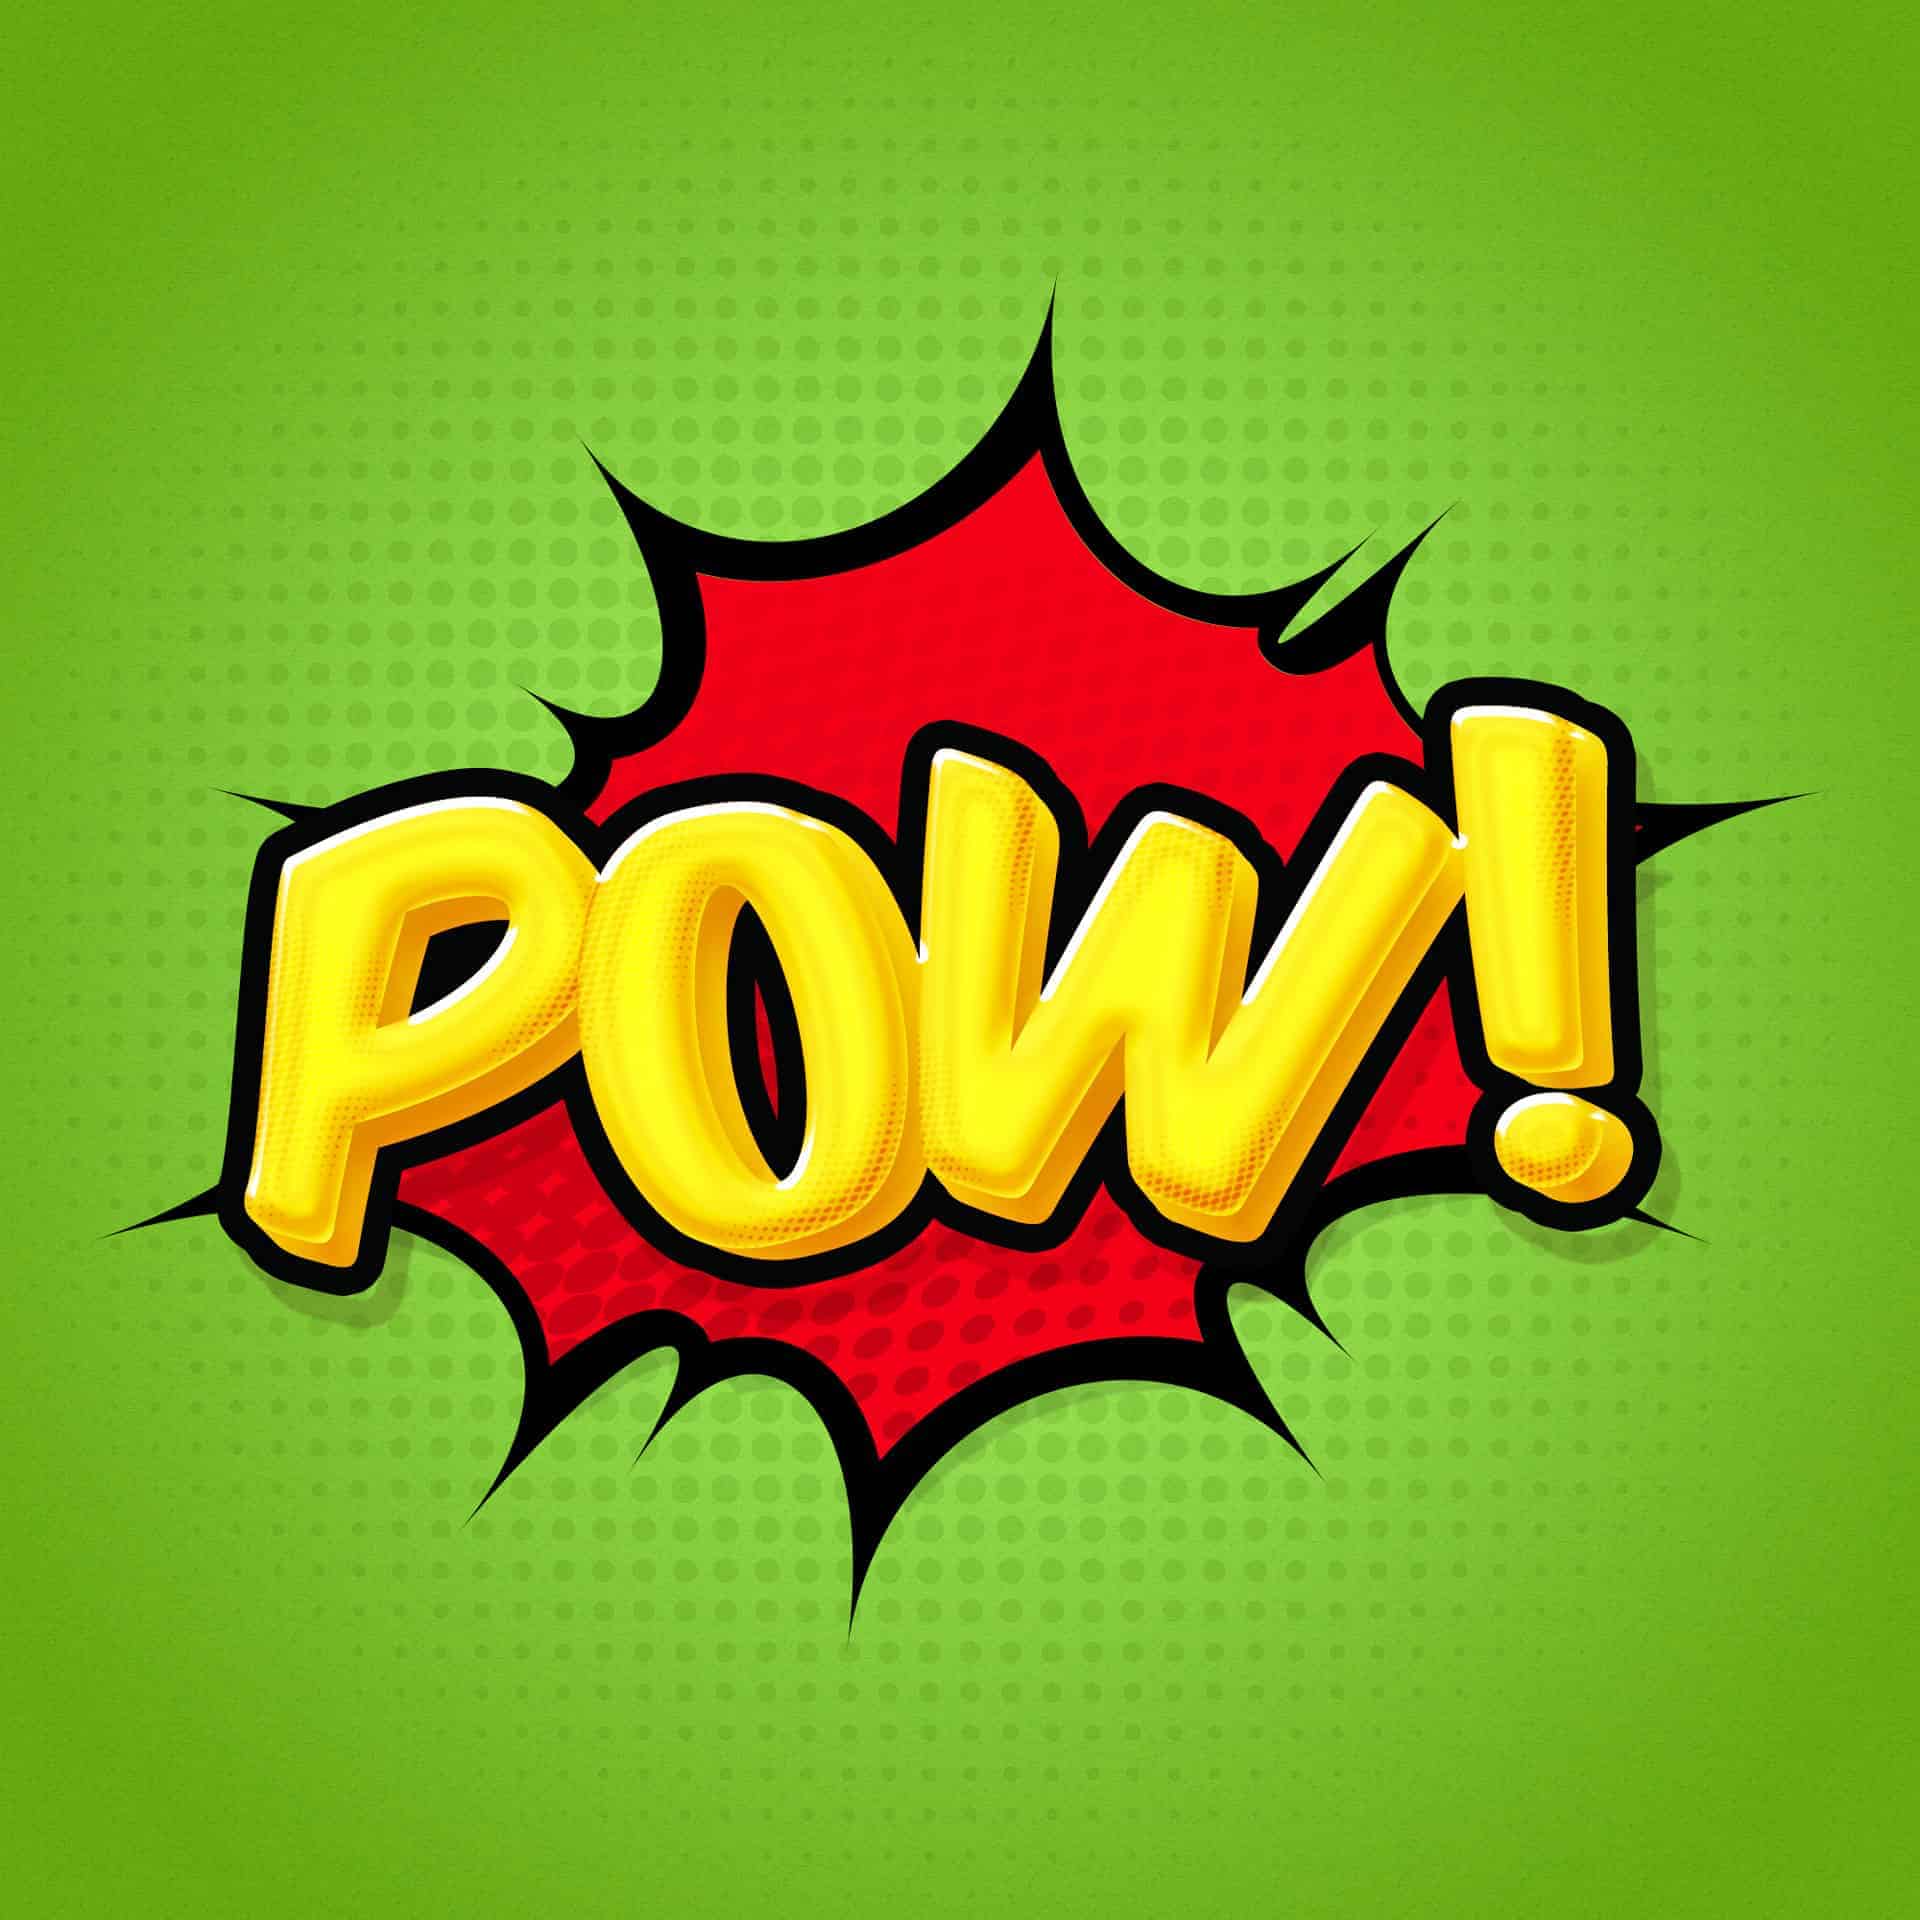 How to Create a Comic Book Text Effect in Photoshop